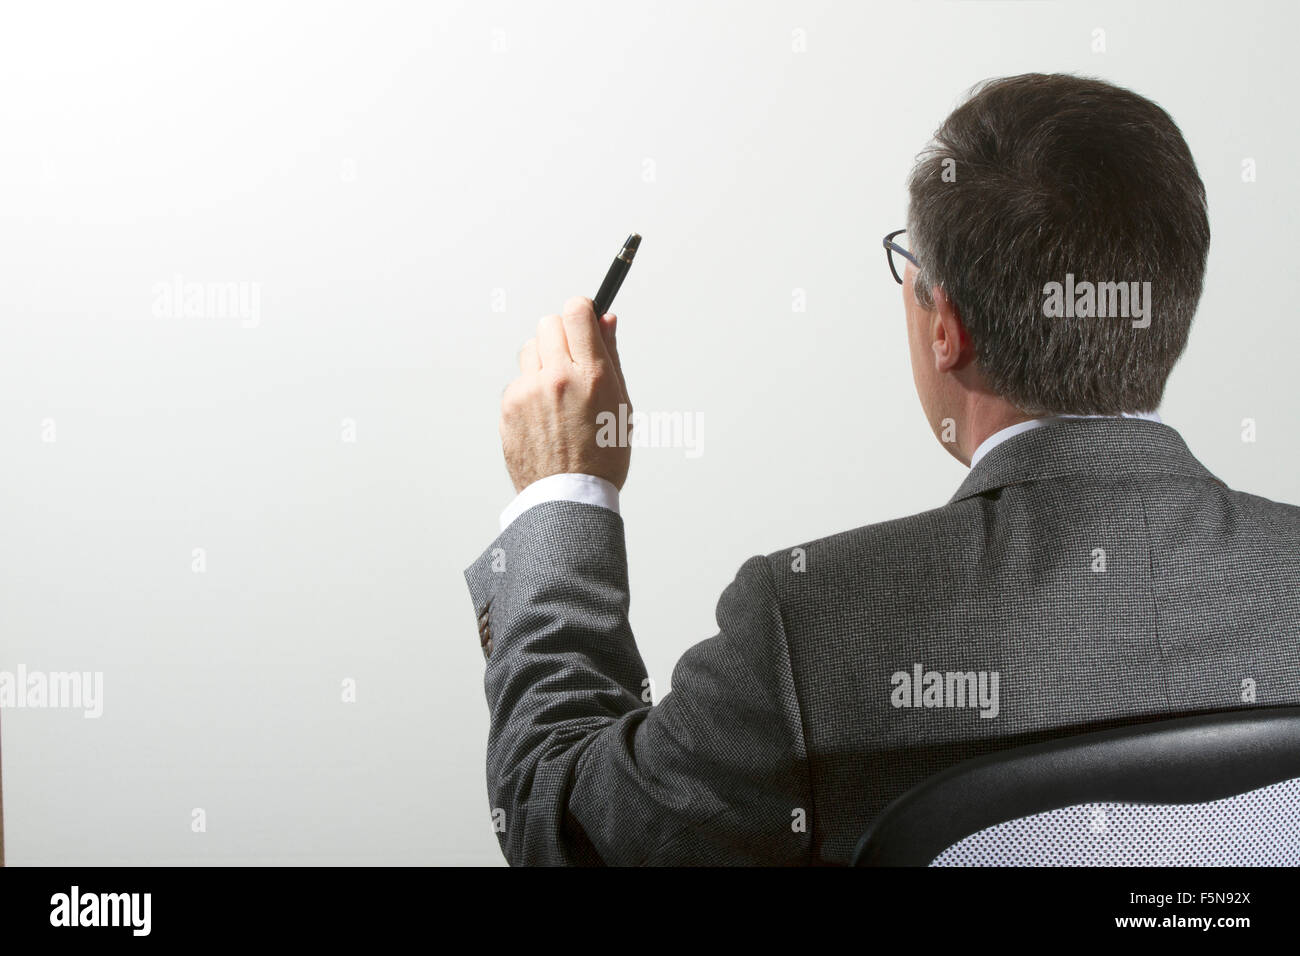 a middle age executive asking questions on a white background with free space for text Stock Photo